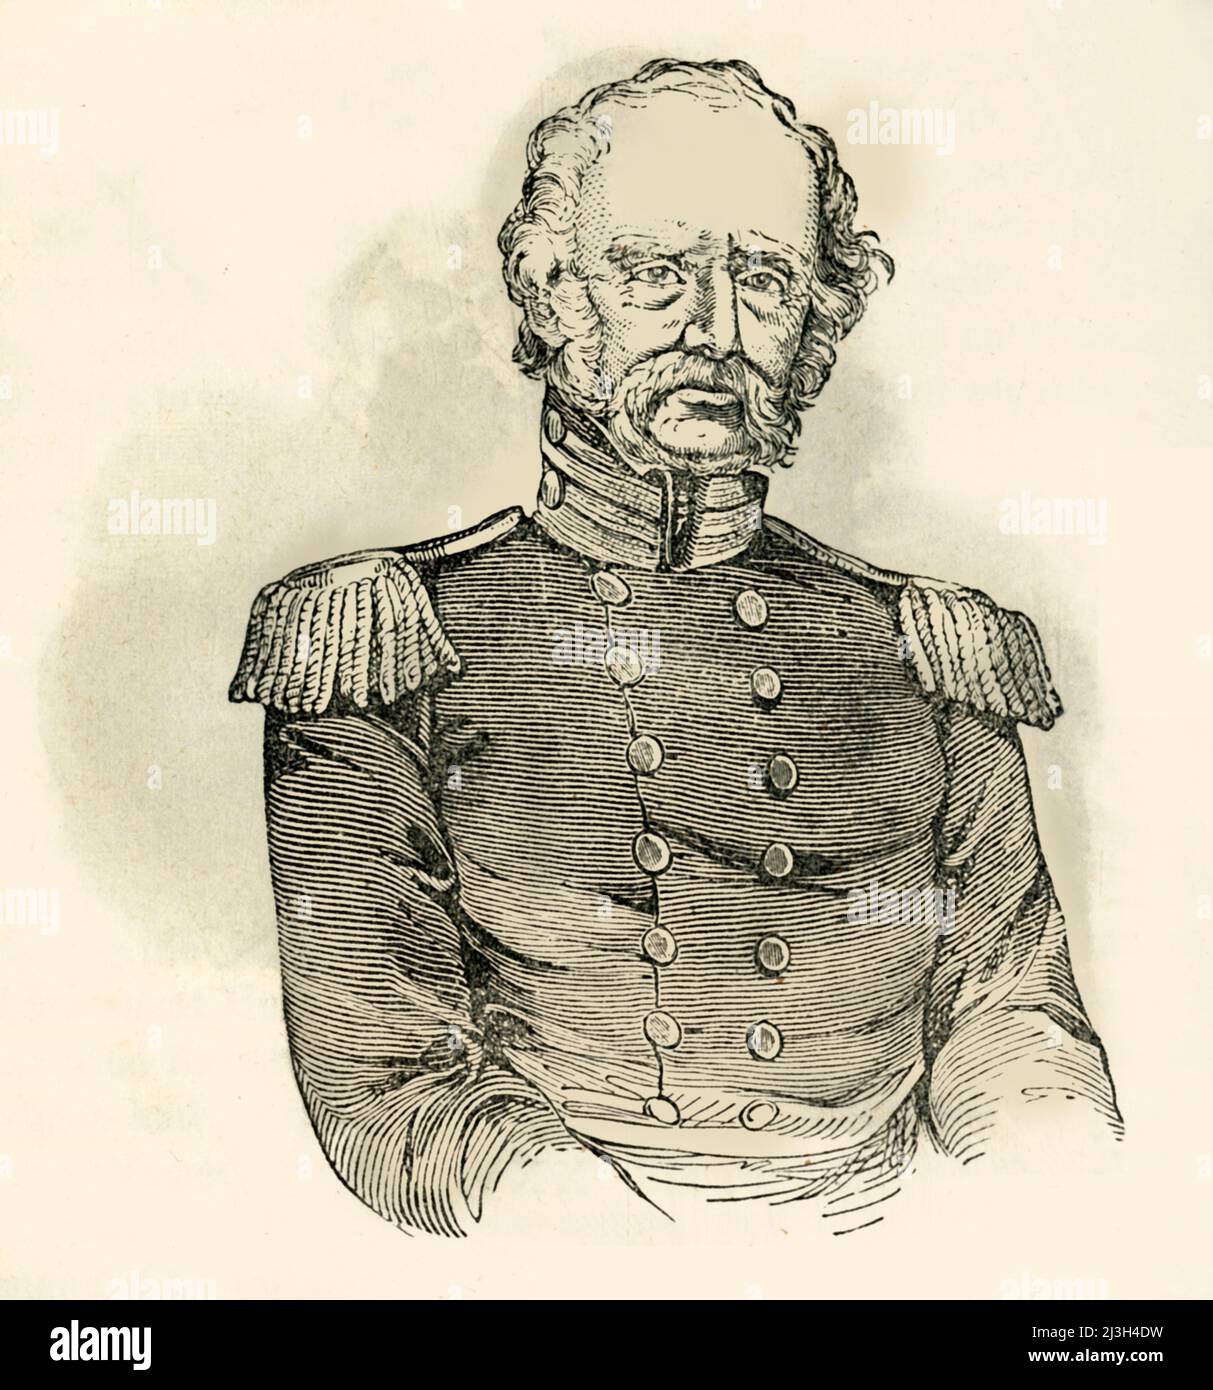 'General Twiggs', 1849. American soldier David E. Twiggs served in the War of 1812, the Black Hawk War, and the Mexican-American War. From &quot;Pictorial History of Mexico and the Mexican War&quot;, by John Frost, LL.D.. [Thomas, Cowperthwait and Co., Philadelphia, 1849] Stock Photo